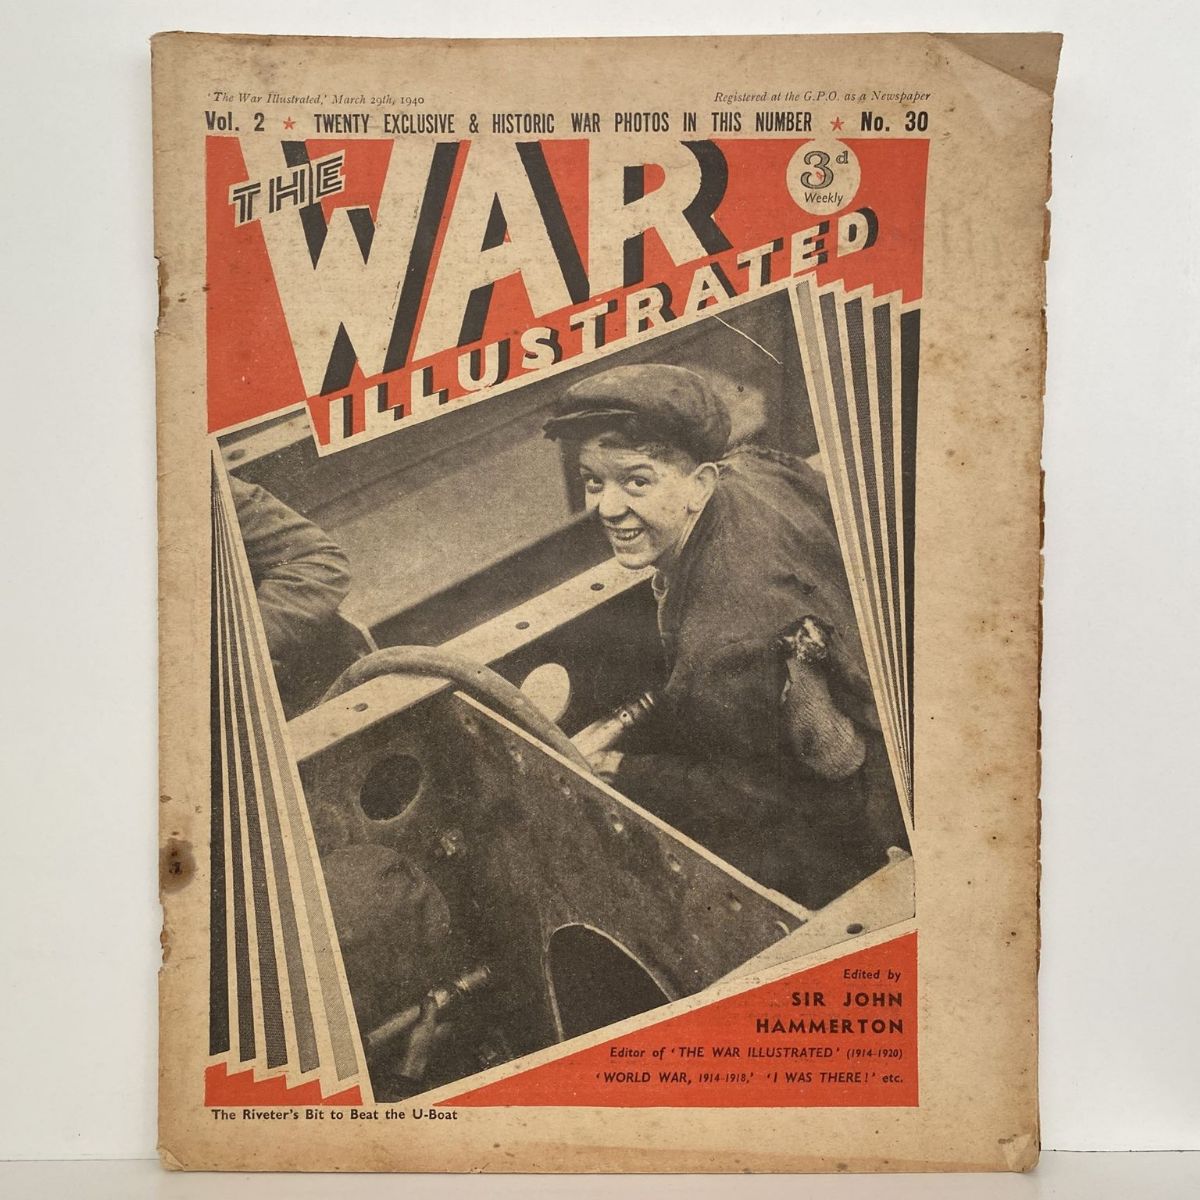 THE WAR ILLUSTRATED - Vol 2, No 30, 29th March 1940